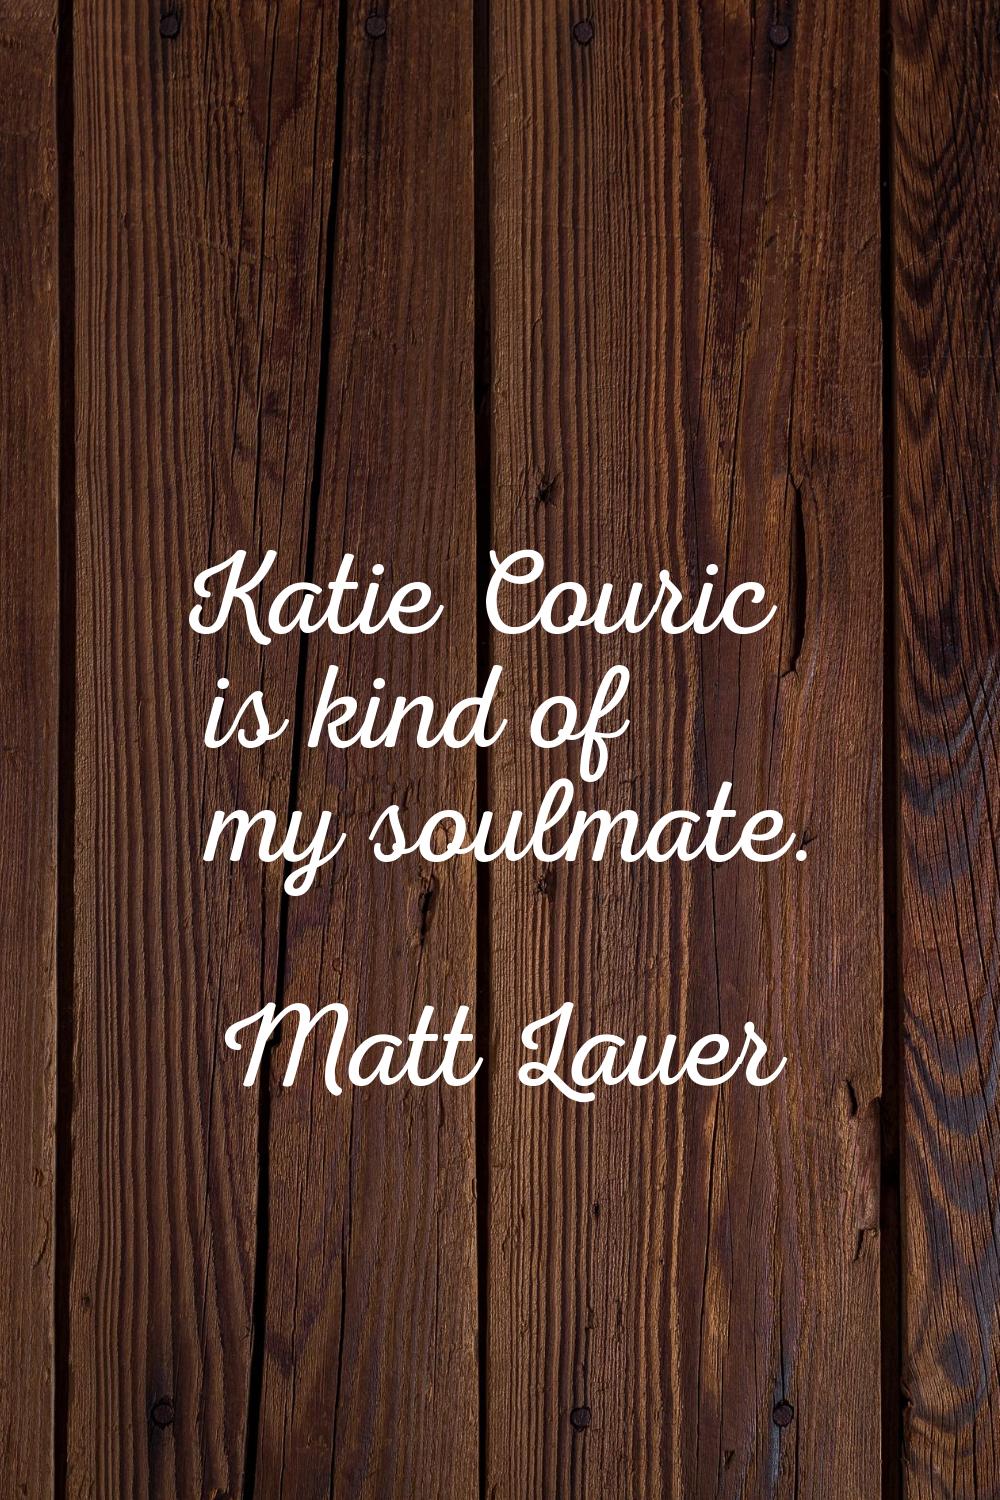 Katie Couric is kind of my soulmate.